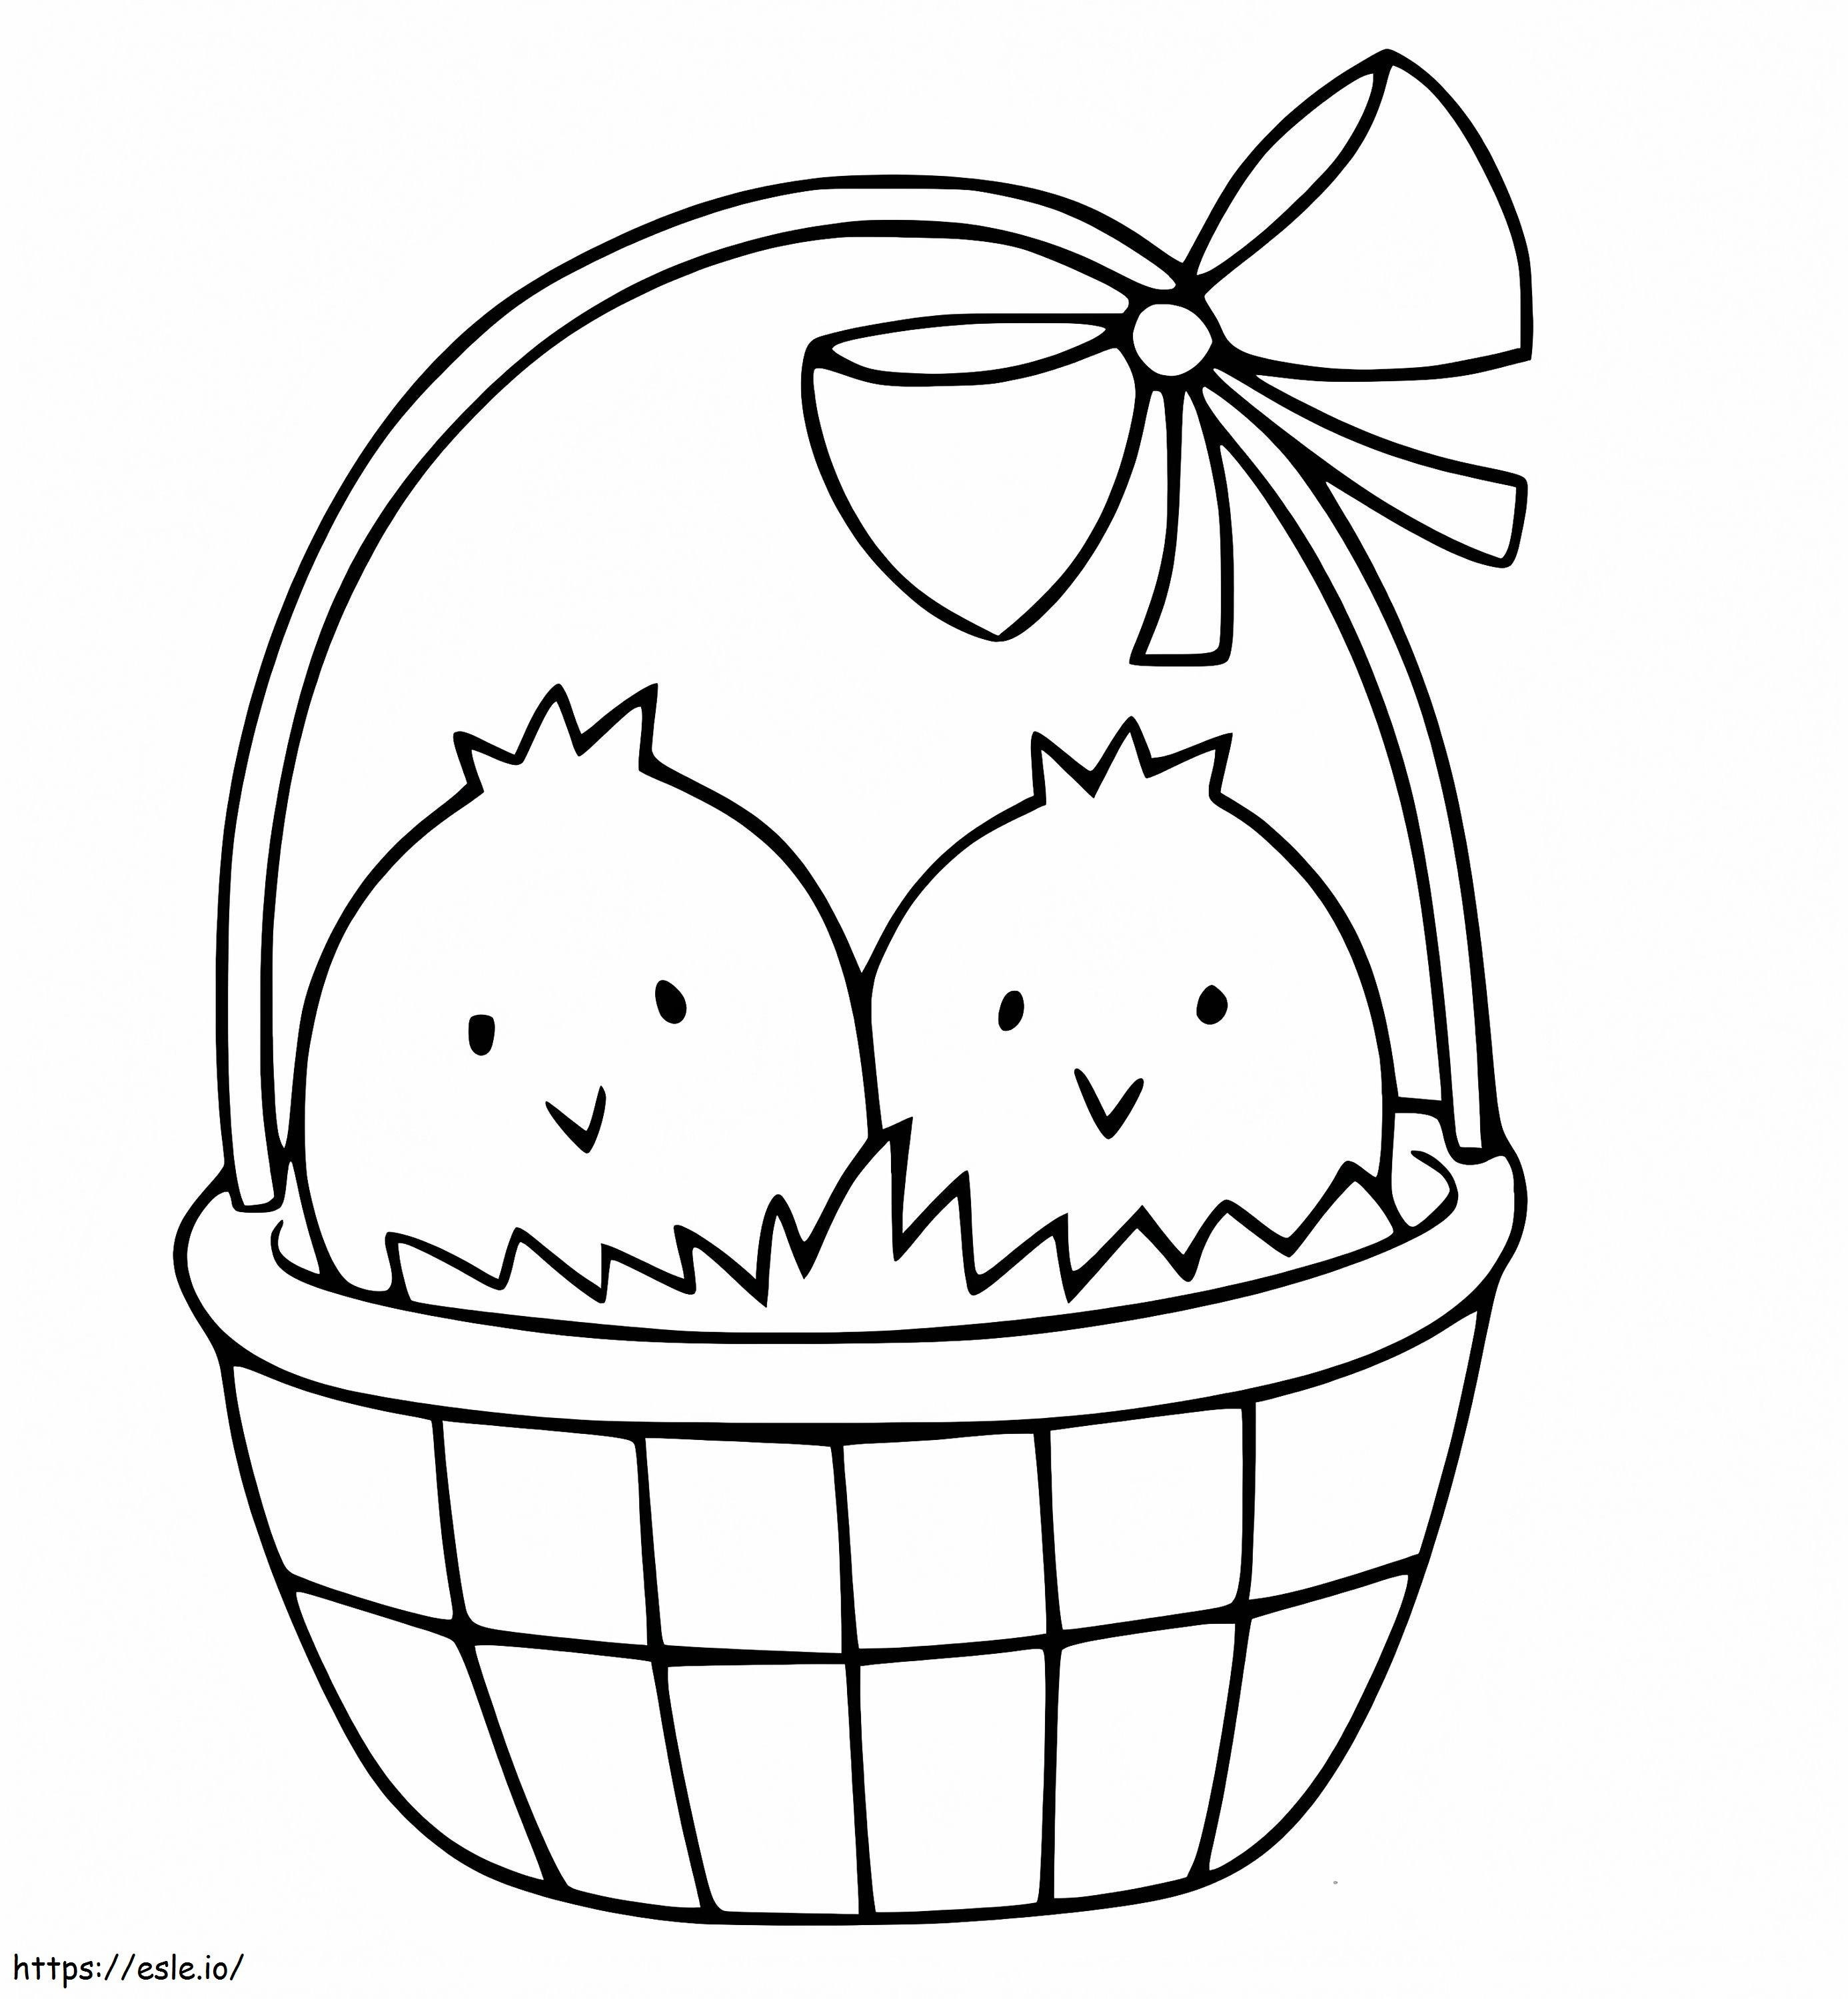 Cute Easter Chicks coloring page